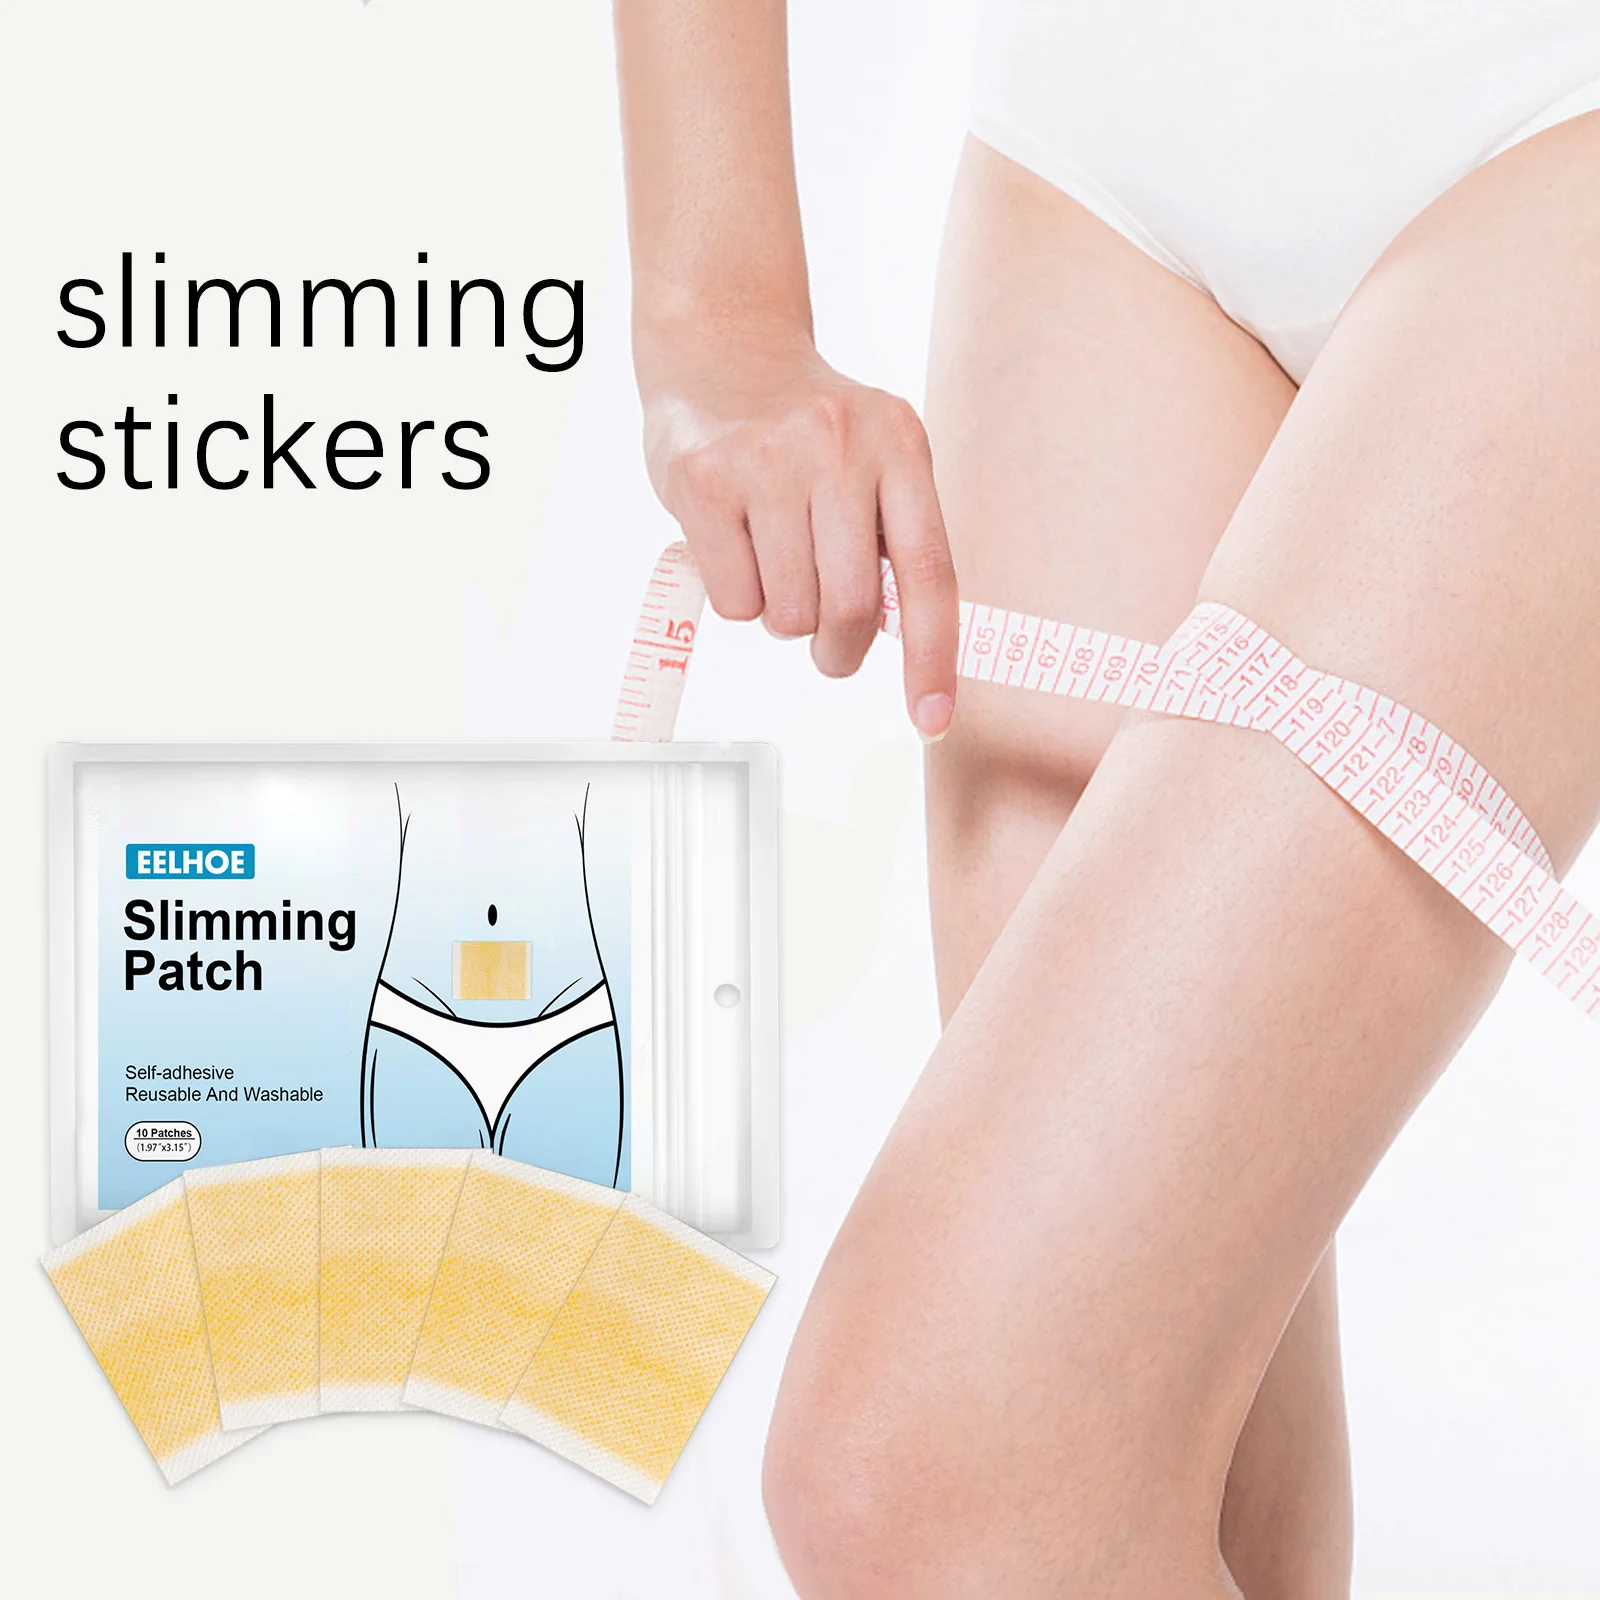 20 Pcs/Lot Slim Patch Slimming Navel Sticker Weight Lose Product Slim Patch Burning Fat Patche Hot Body Shaping Slimming Sticker